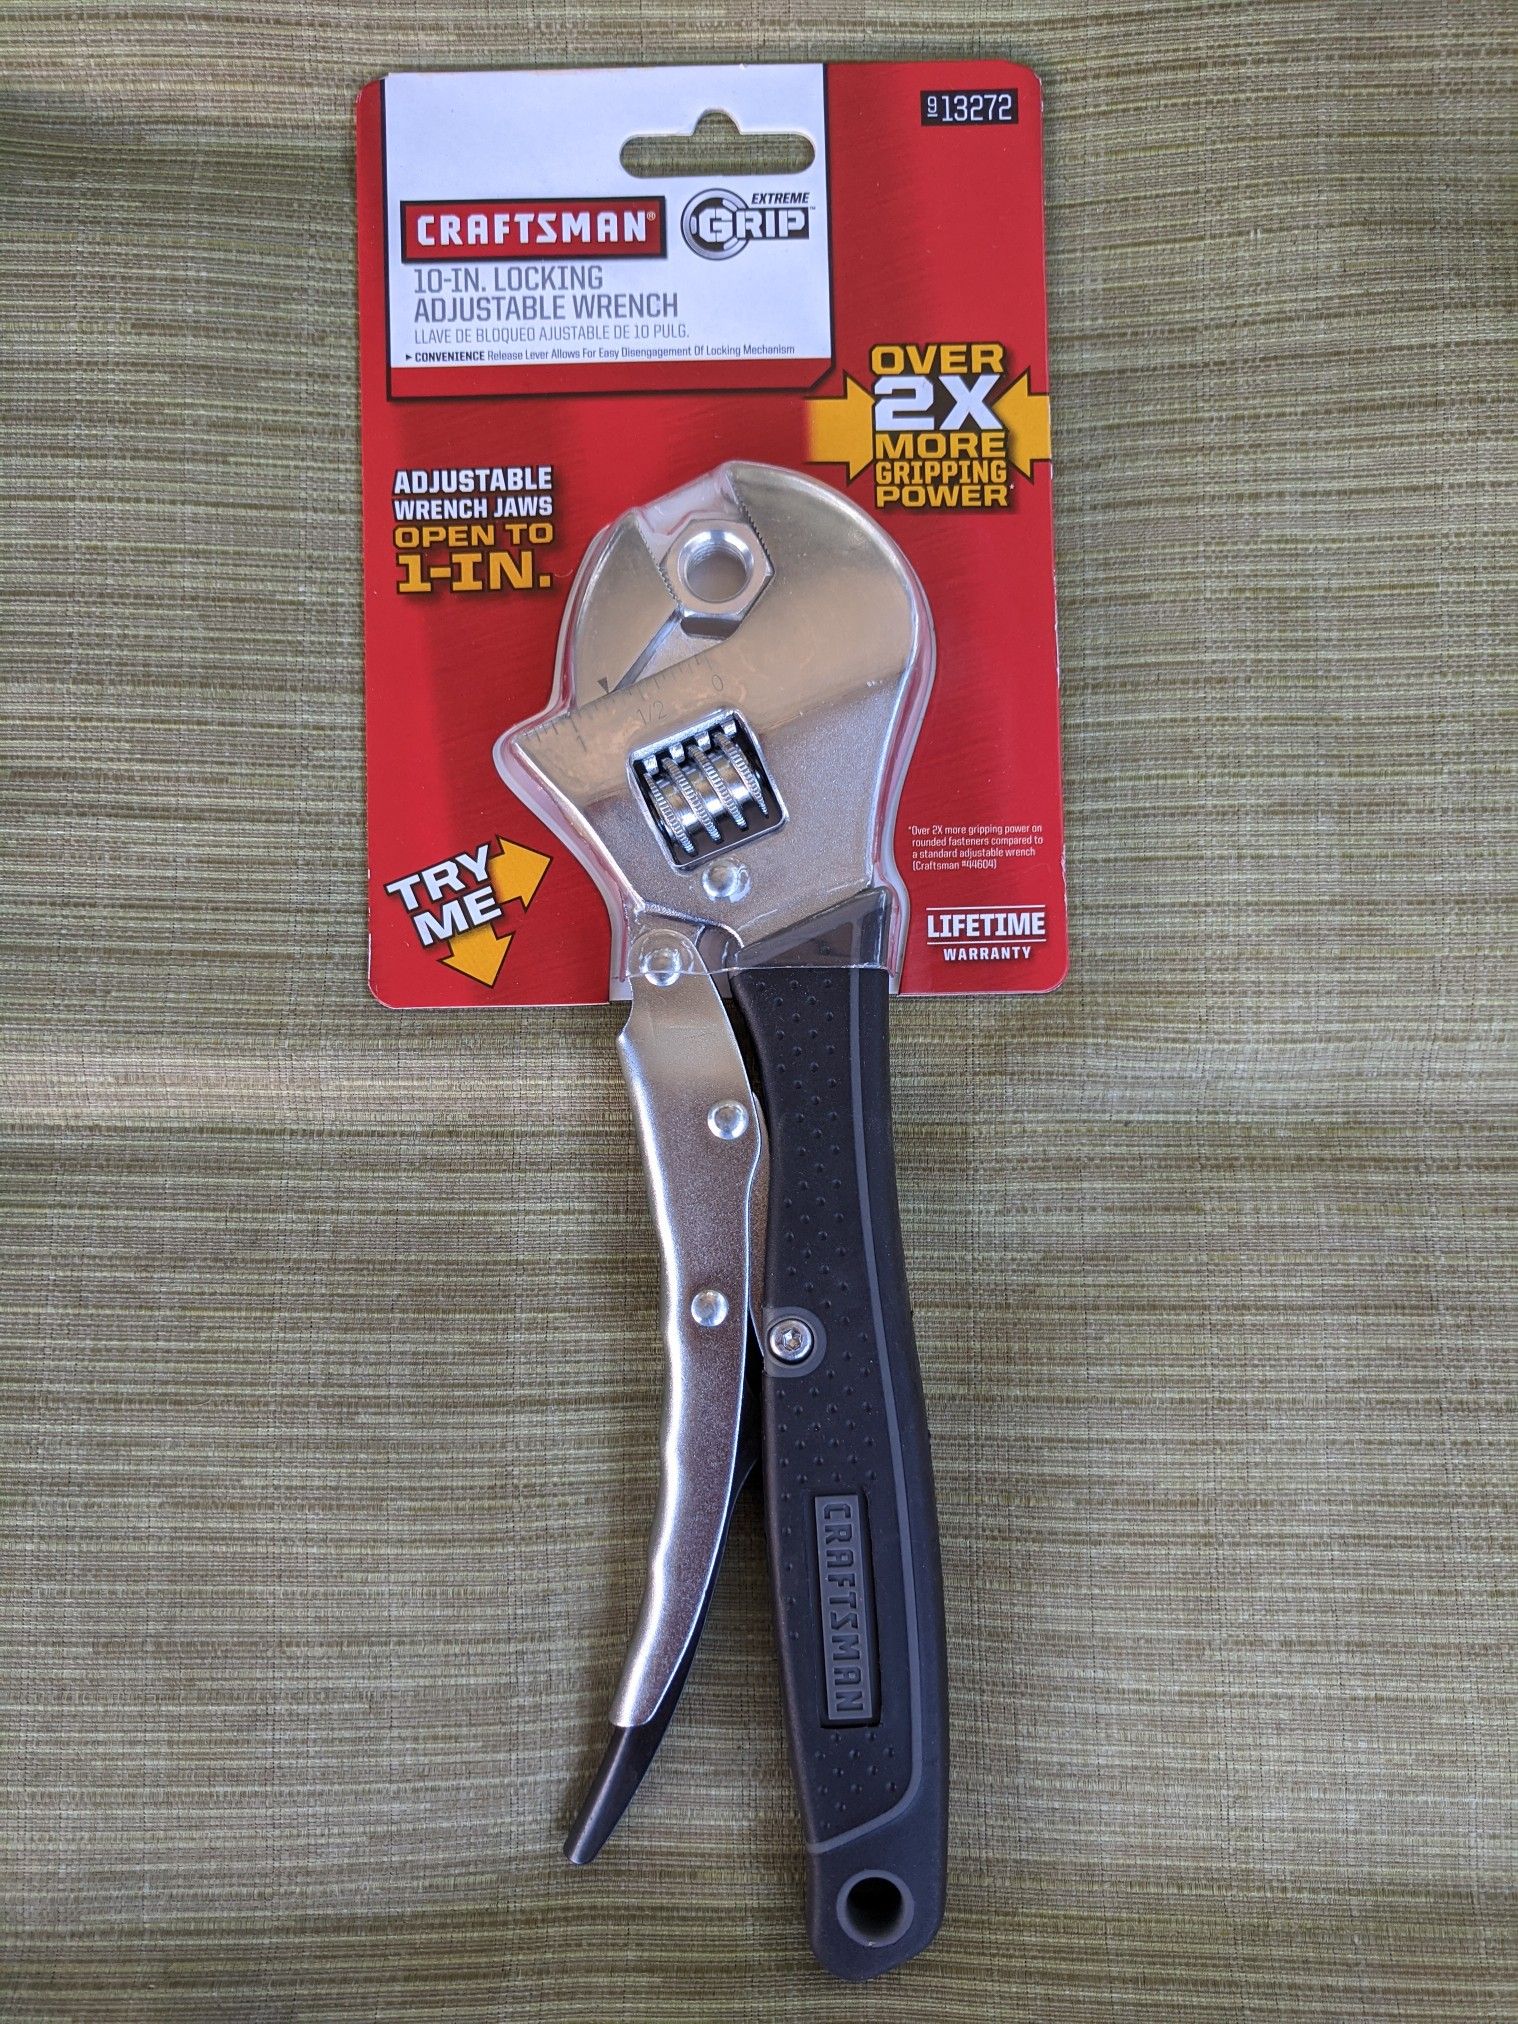 New Craftsman Wrenches